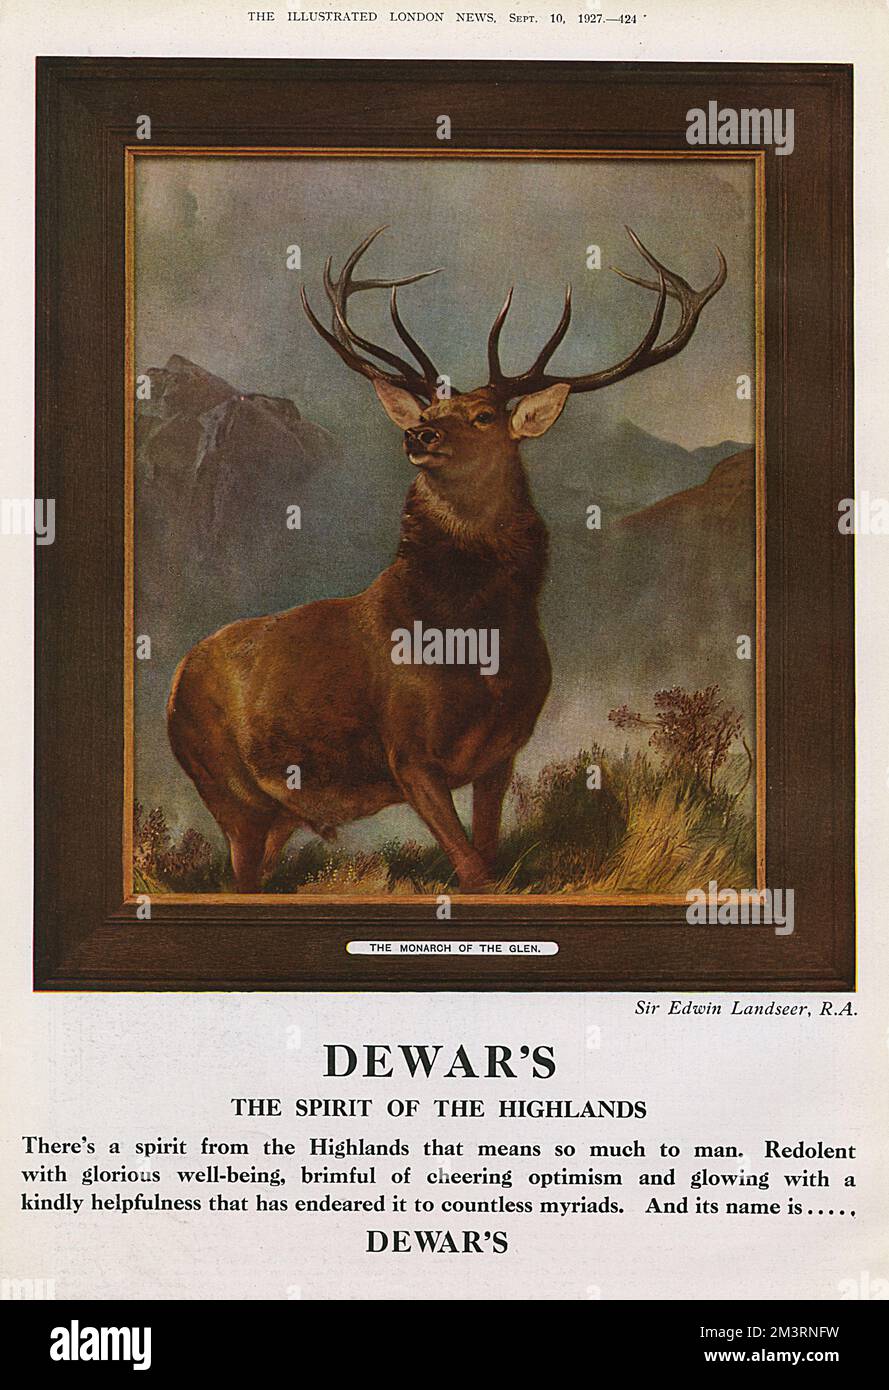 Advertisement for Dewar's whisky, the spirit of the highlands, featuring Edwin Landseer's painting The Monarch of the Glen.   1927 Stock Photo